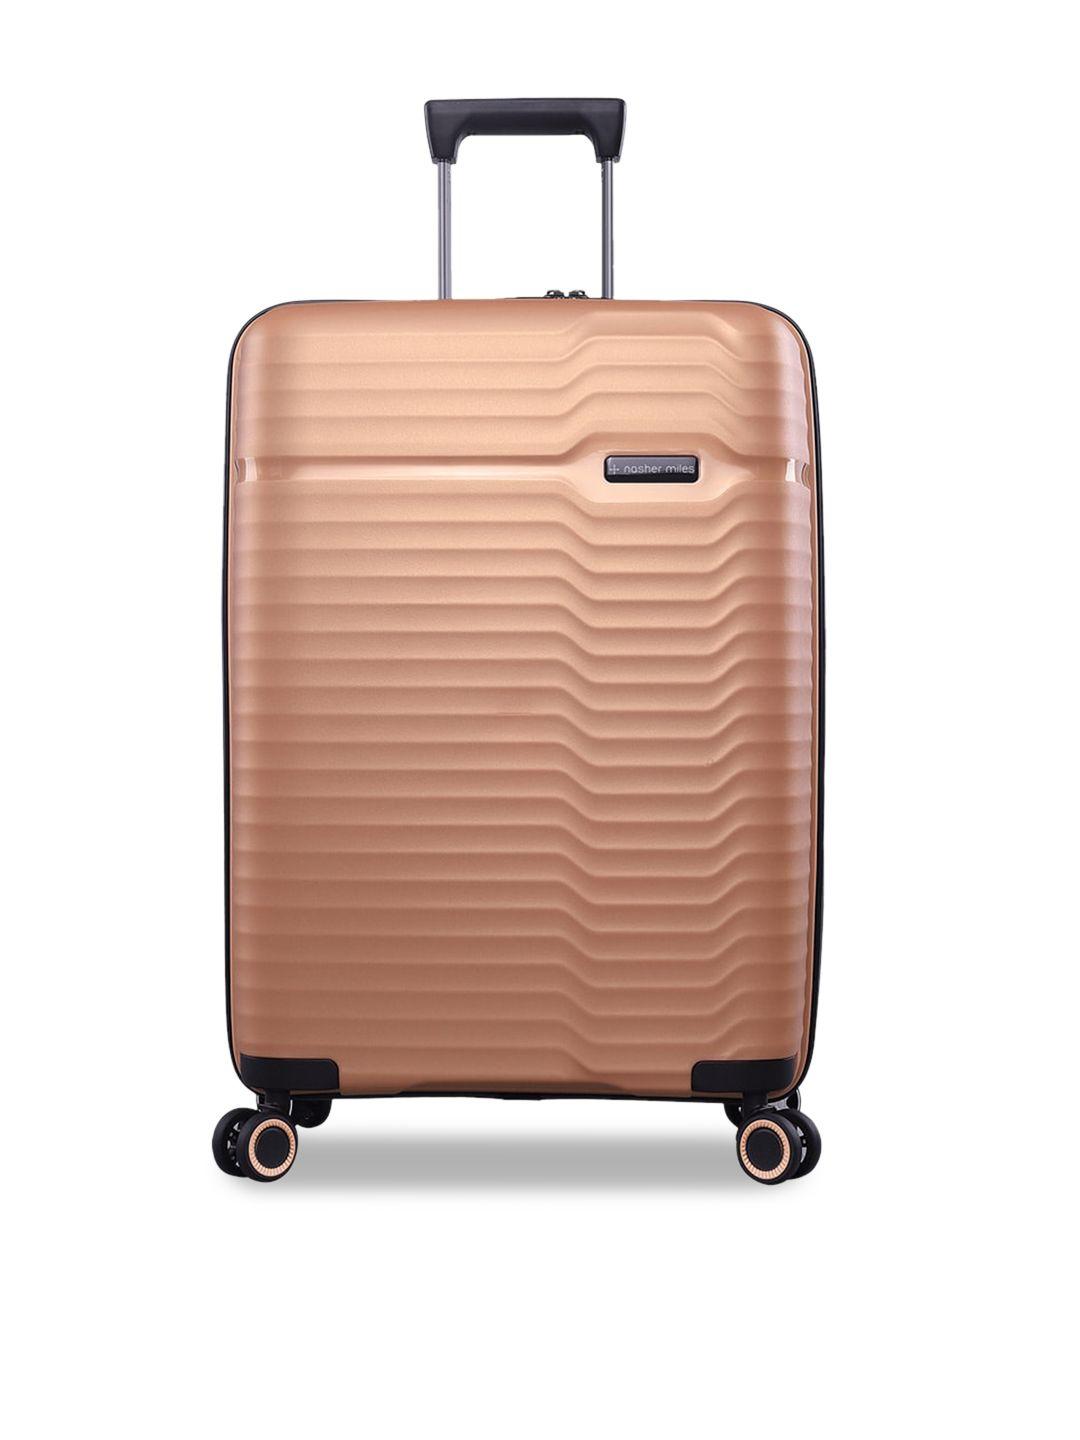 nasher miles gold toned hard-sided check-in luggage trolley bag